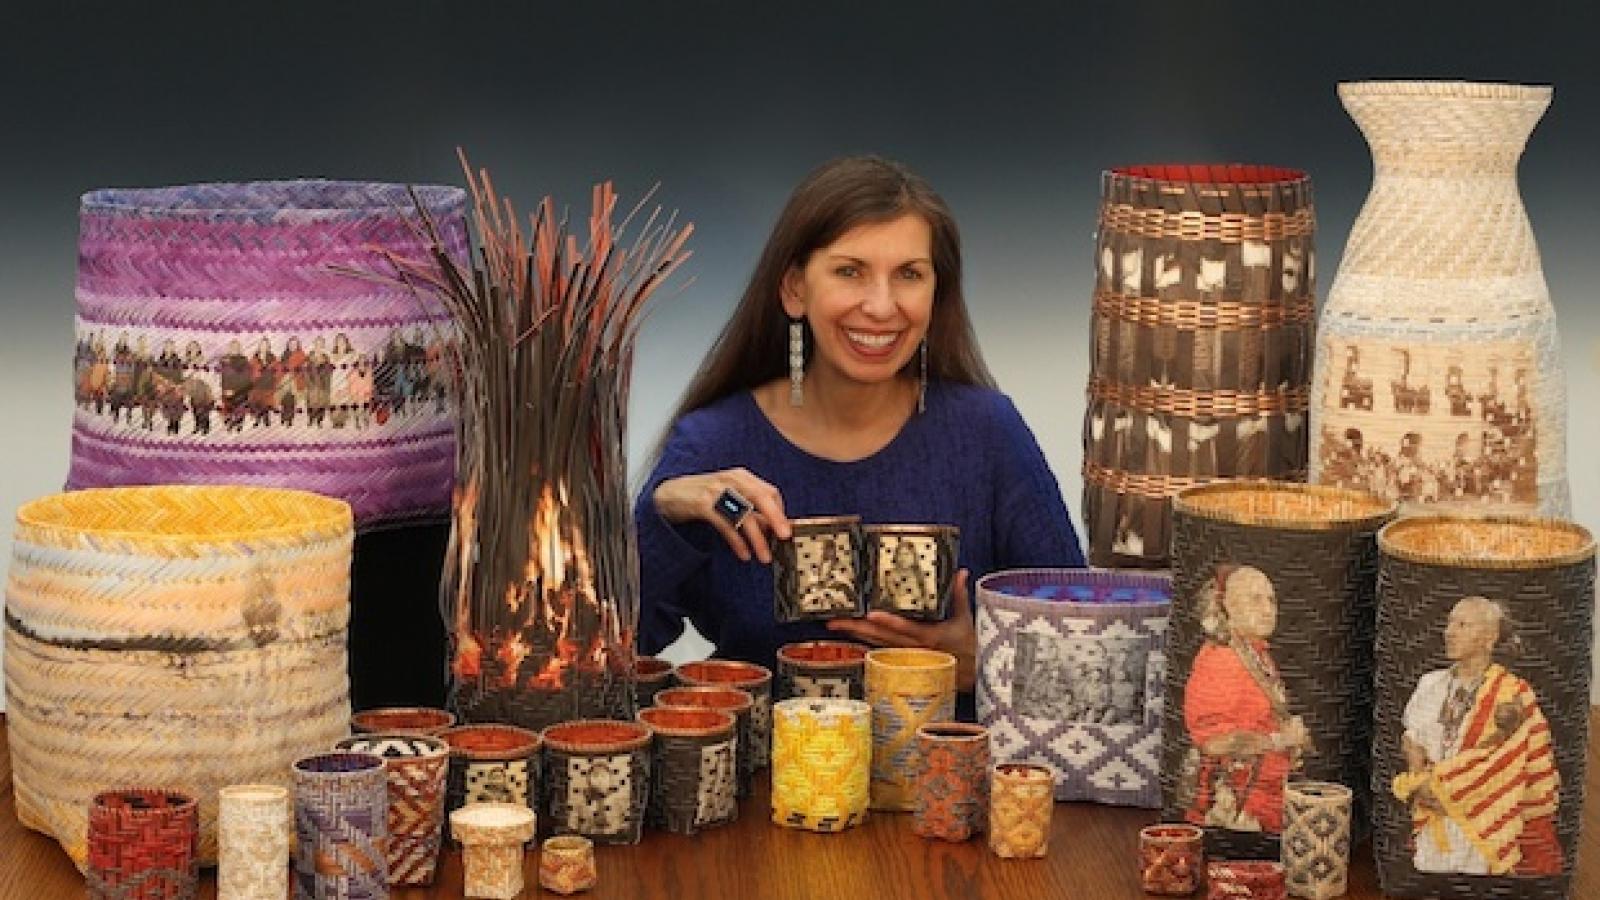 a native american woman with long dark hair surrounded by a selection of handwoven baskets featuring photographs and snippets of texts